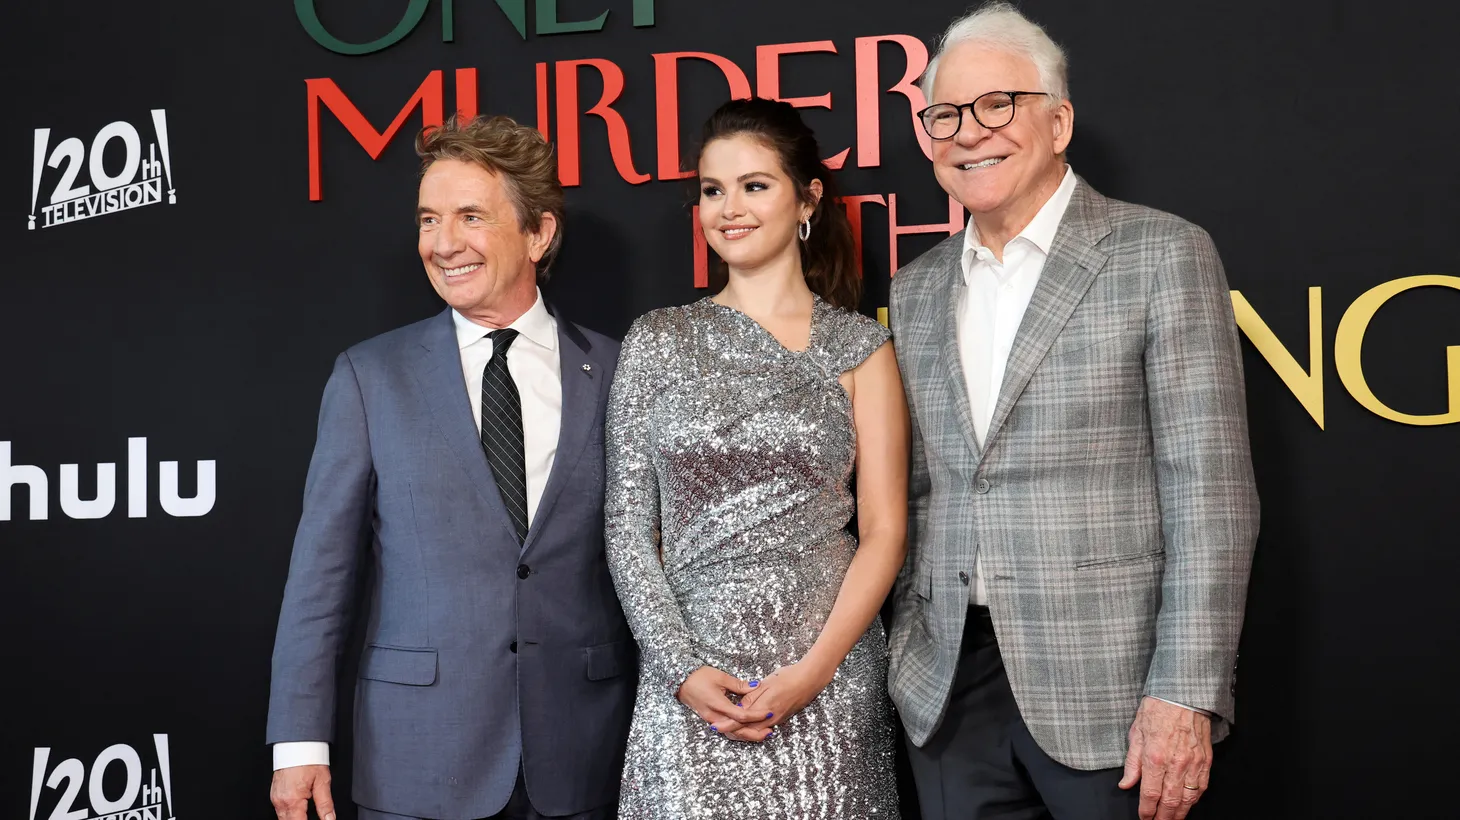 “That's a good idea: three older guys who live in a building and solve murders because they don't have anything else to do,” says Steve Martin, whose idea morphed into adding Selena Gomez as the third cast member. Martin Short (left), Selena Gomez and Steve Martin attend a premiere for season 2 of Only Murders in the Building, in Los Angeles, California, on June 27, 2022.